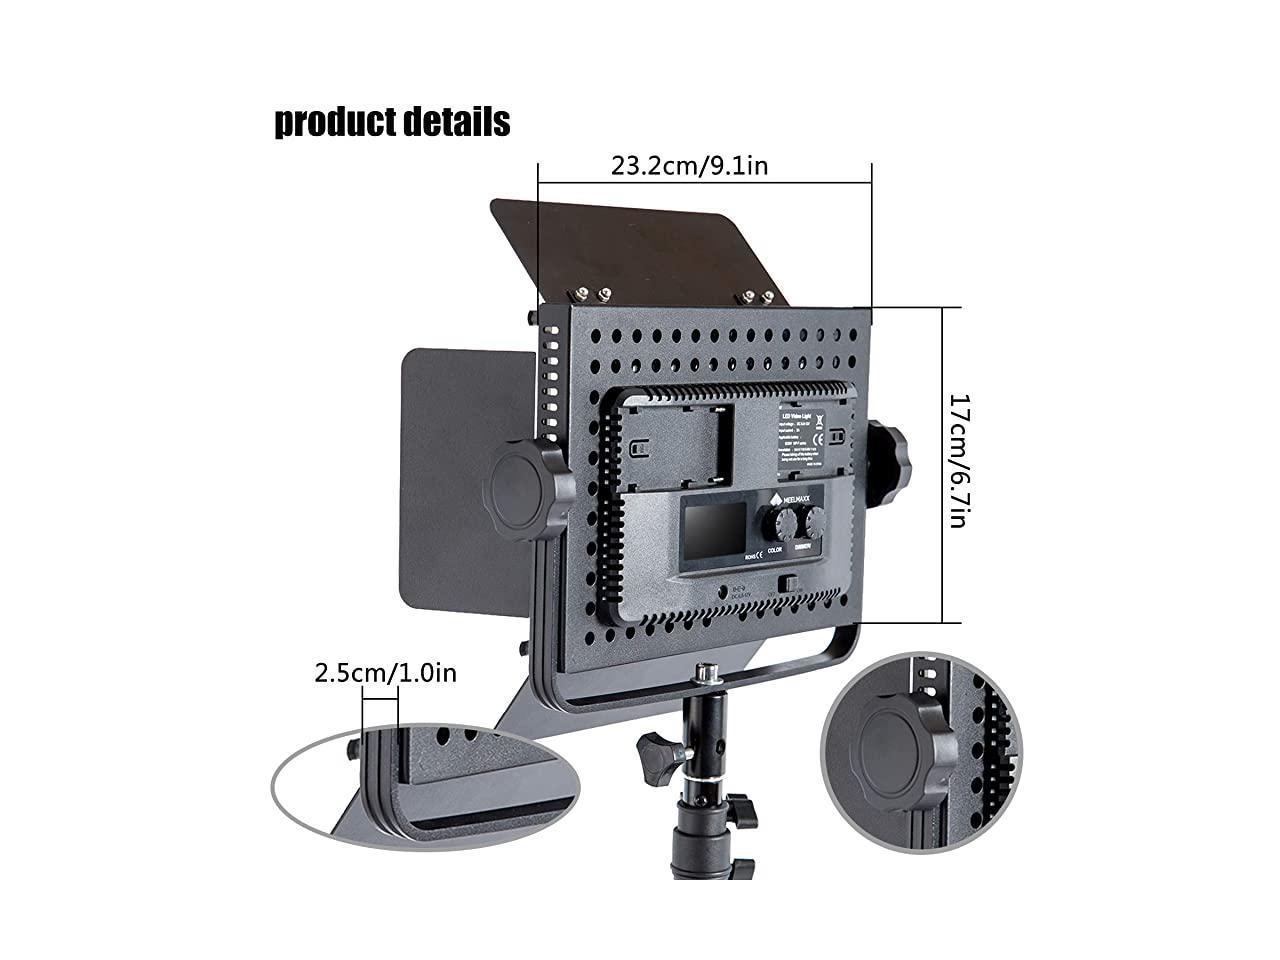 YouTube Outdoor Video Photography Lighting Kit MEELMAXX Dimmable Bi-Color LED with U Bracket Professional Video Light for Studio 3200-5600K 340 LED Beads CRI 97+ Durable Metal Frame